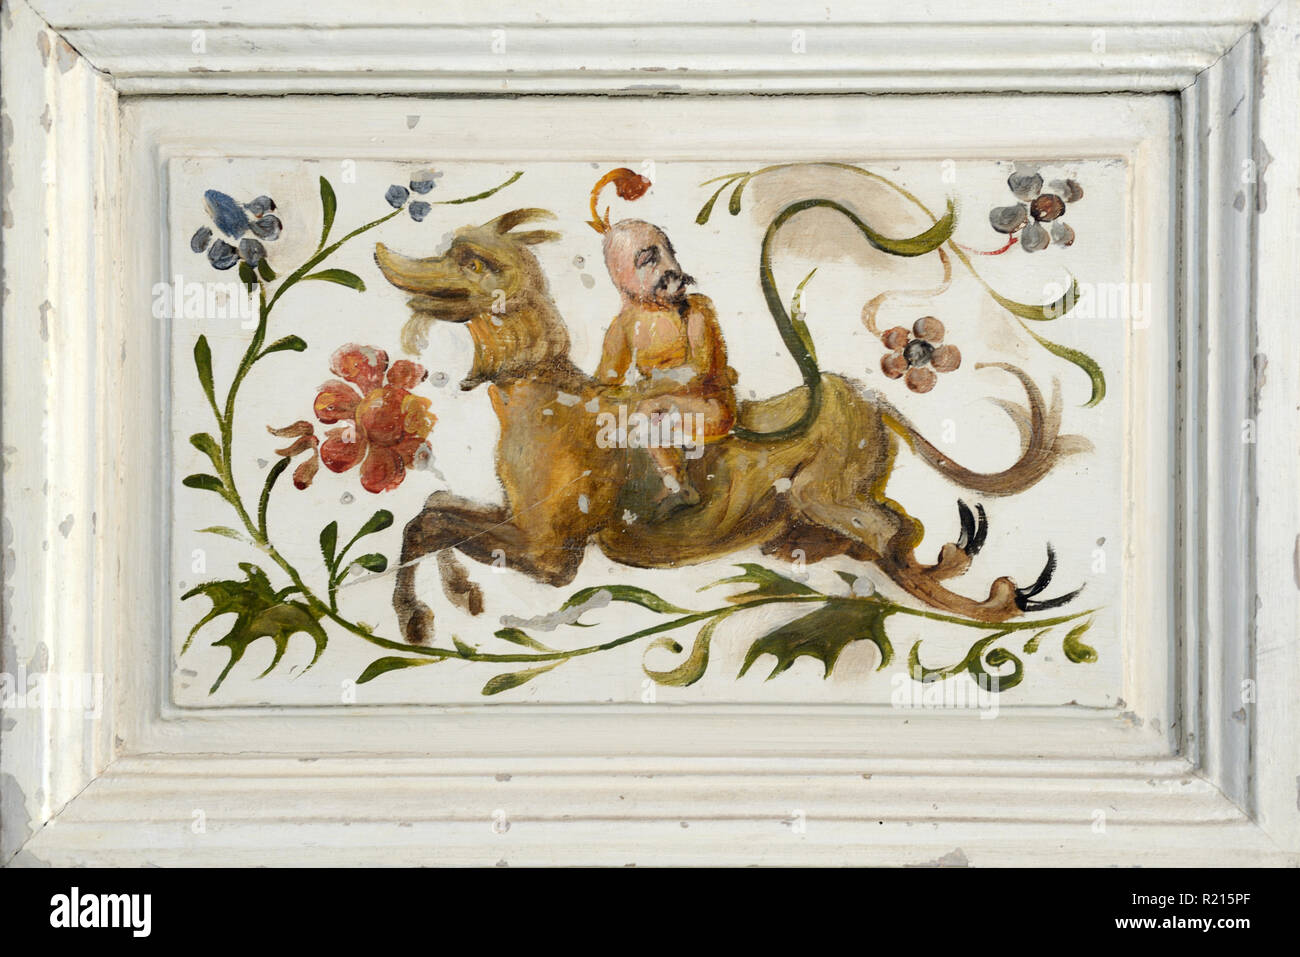 Strange Surreal Rider Riding Mythical Horse-like Creature on Interior Painted Doors or Cupboard Door Provence France c19th Stock Photo